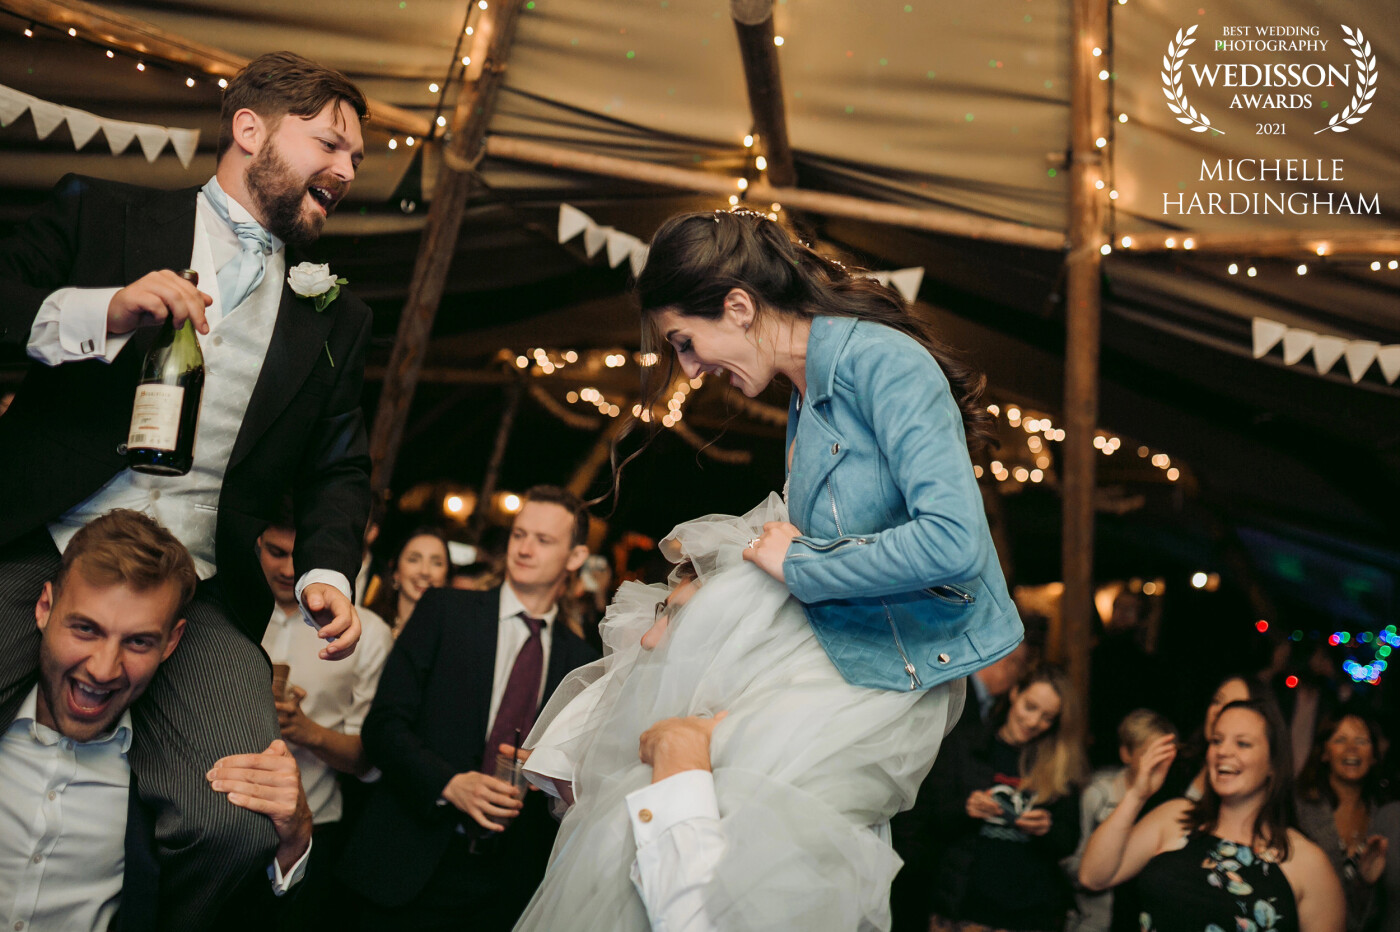 Lifted together and dancing in the moonlight. What better way to end a wedding! A fantastic day of celebration and I was just in awe of the fun!